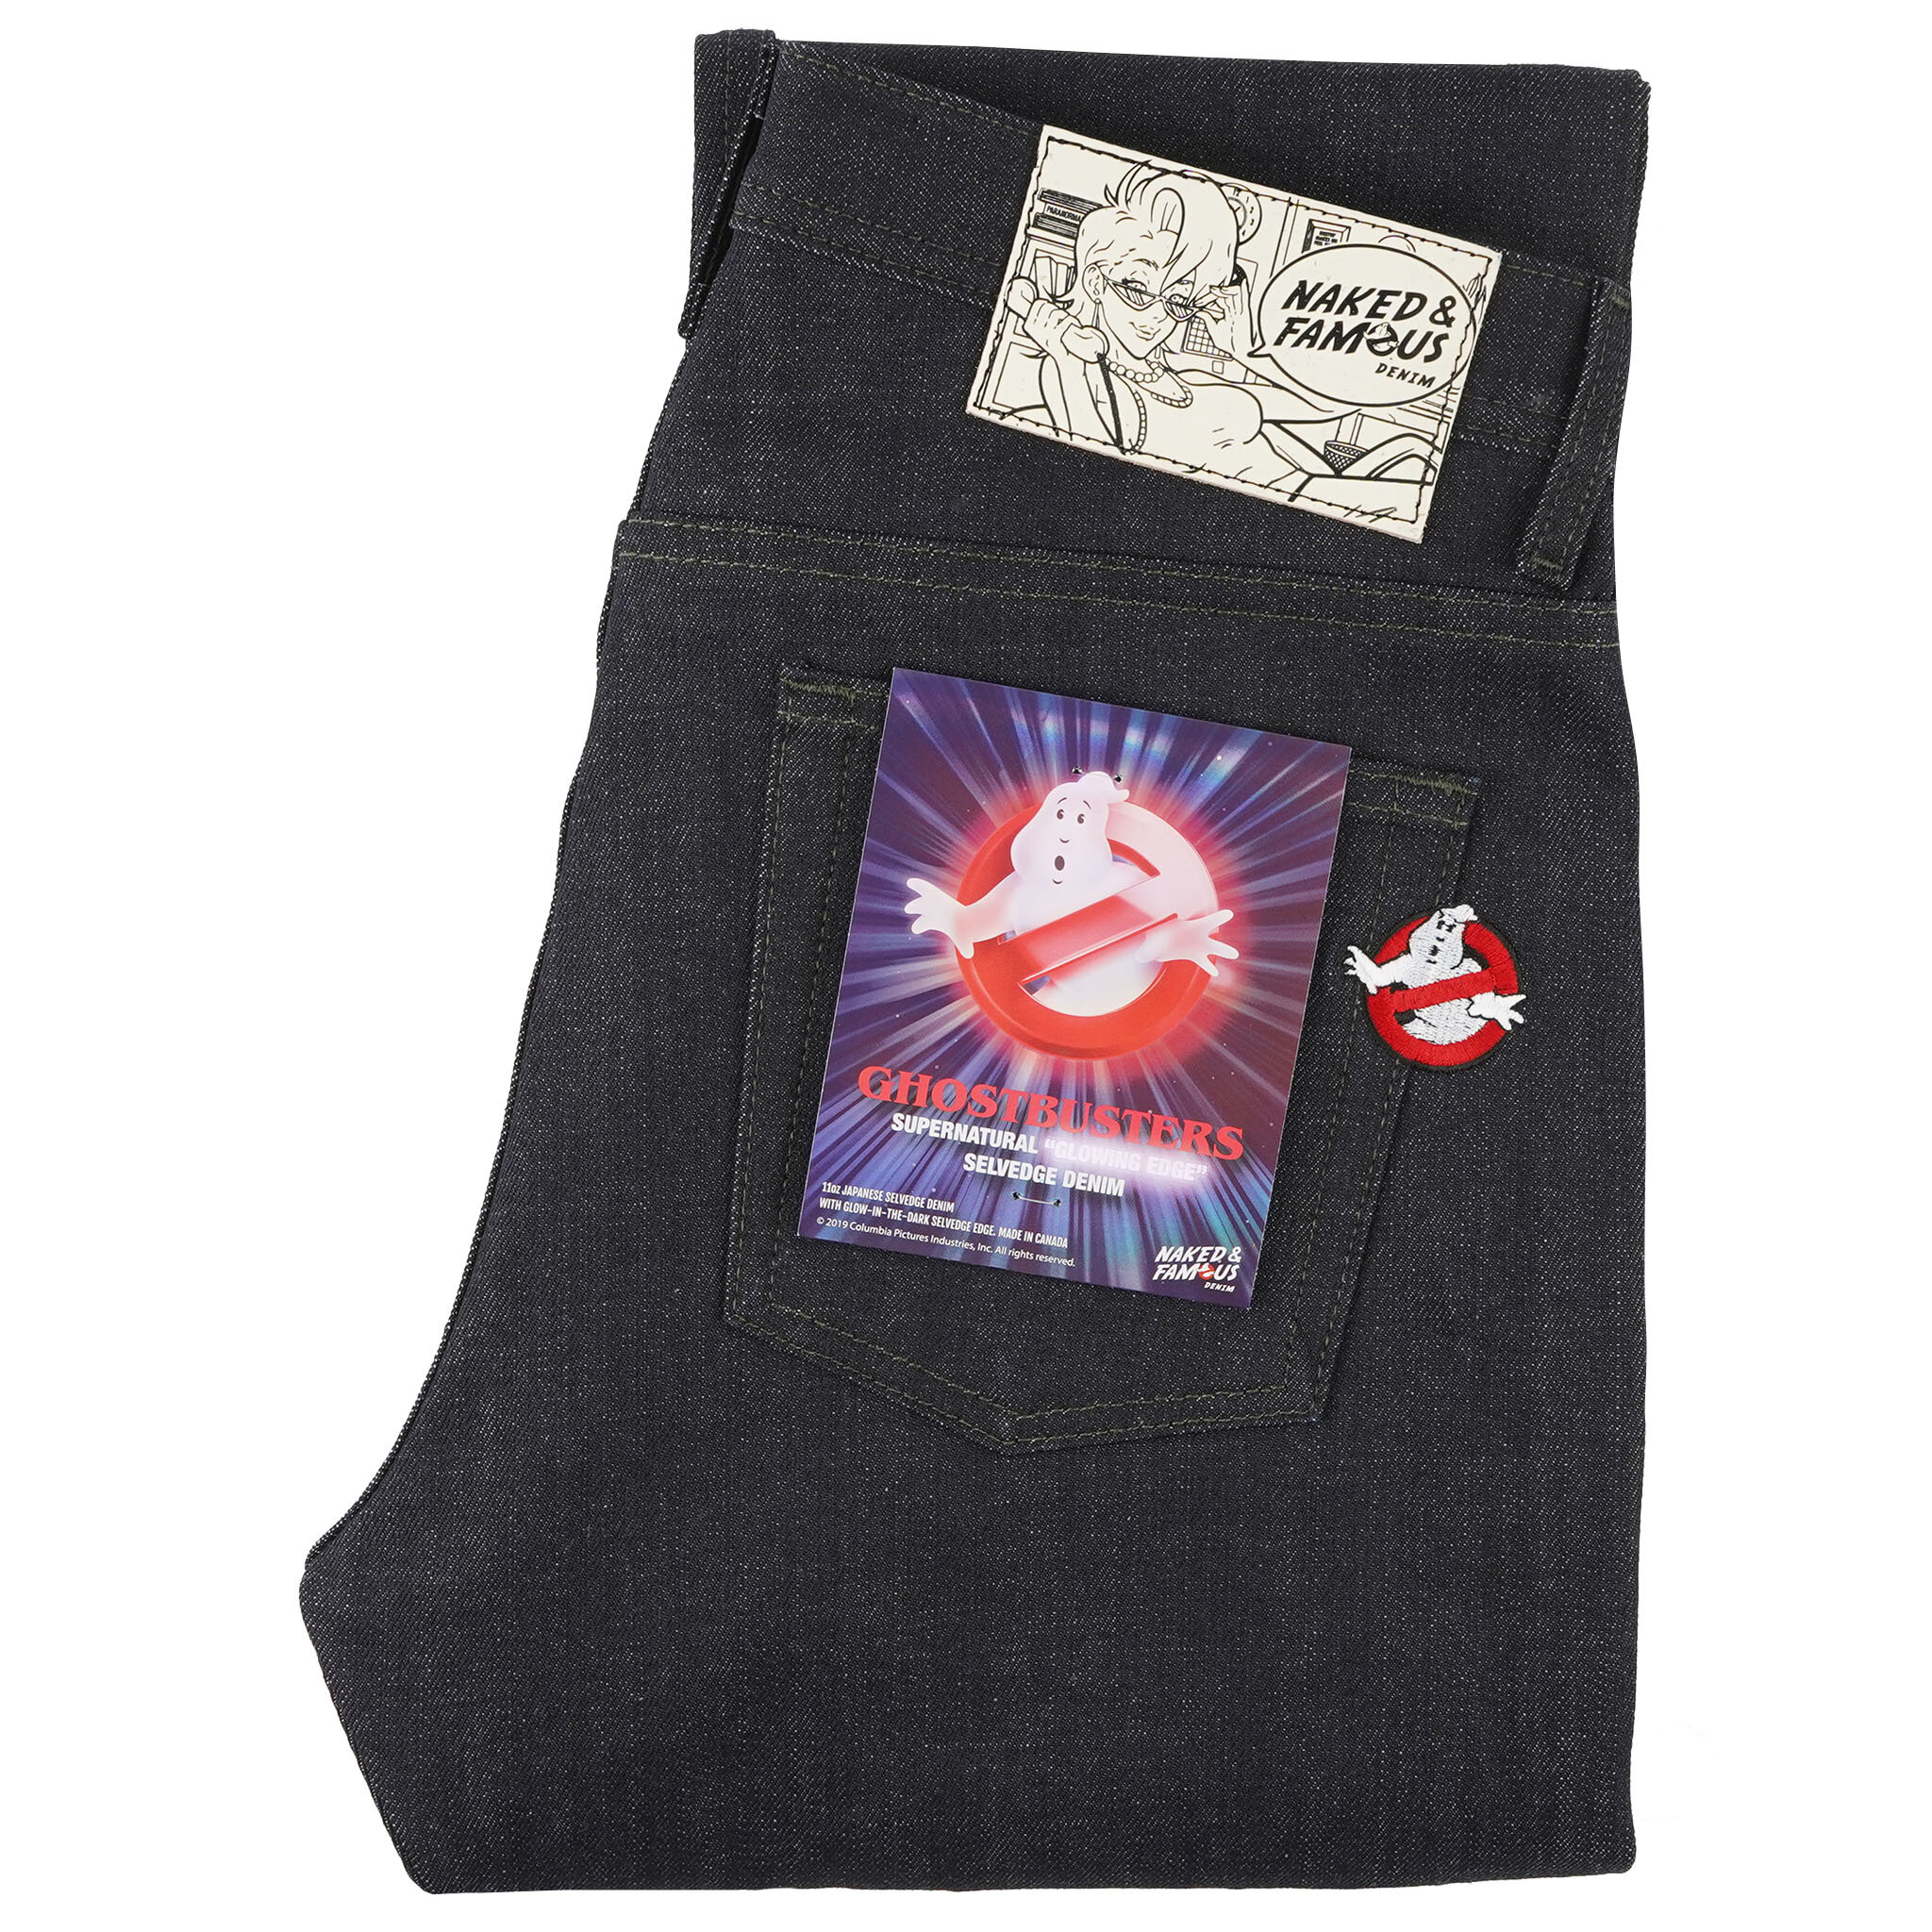  Ghostbusters Supernatural Selvedge jeans - folded 